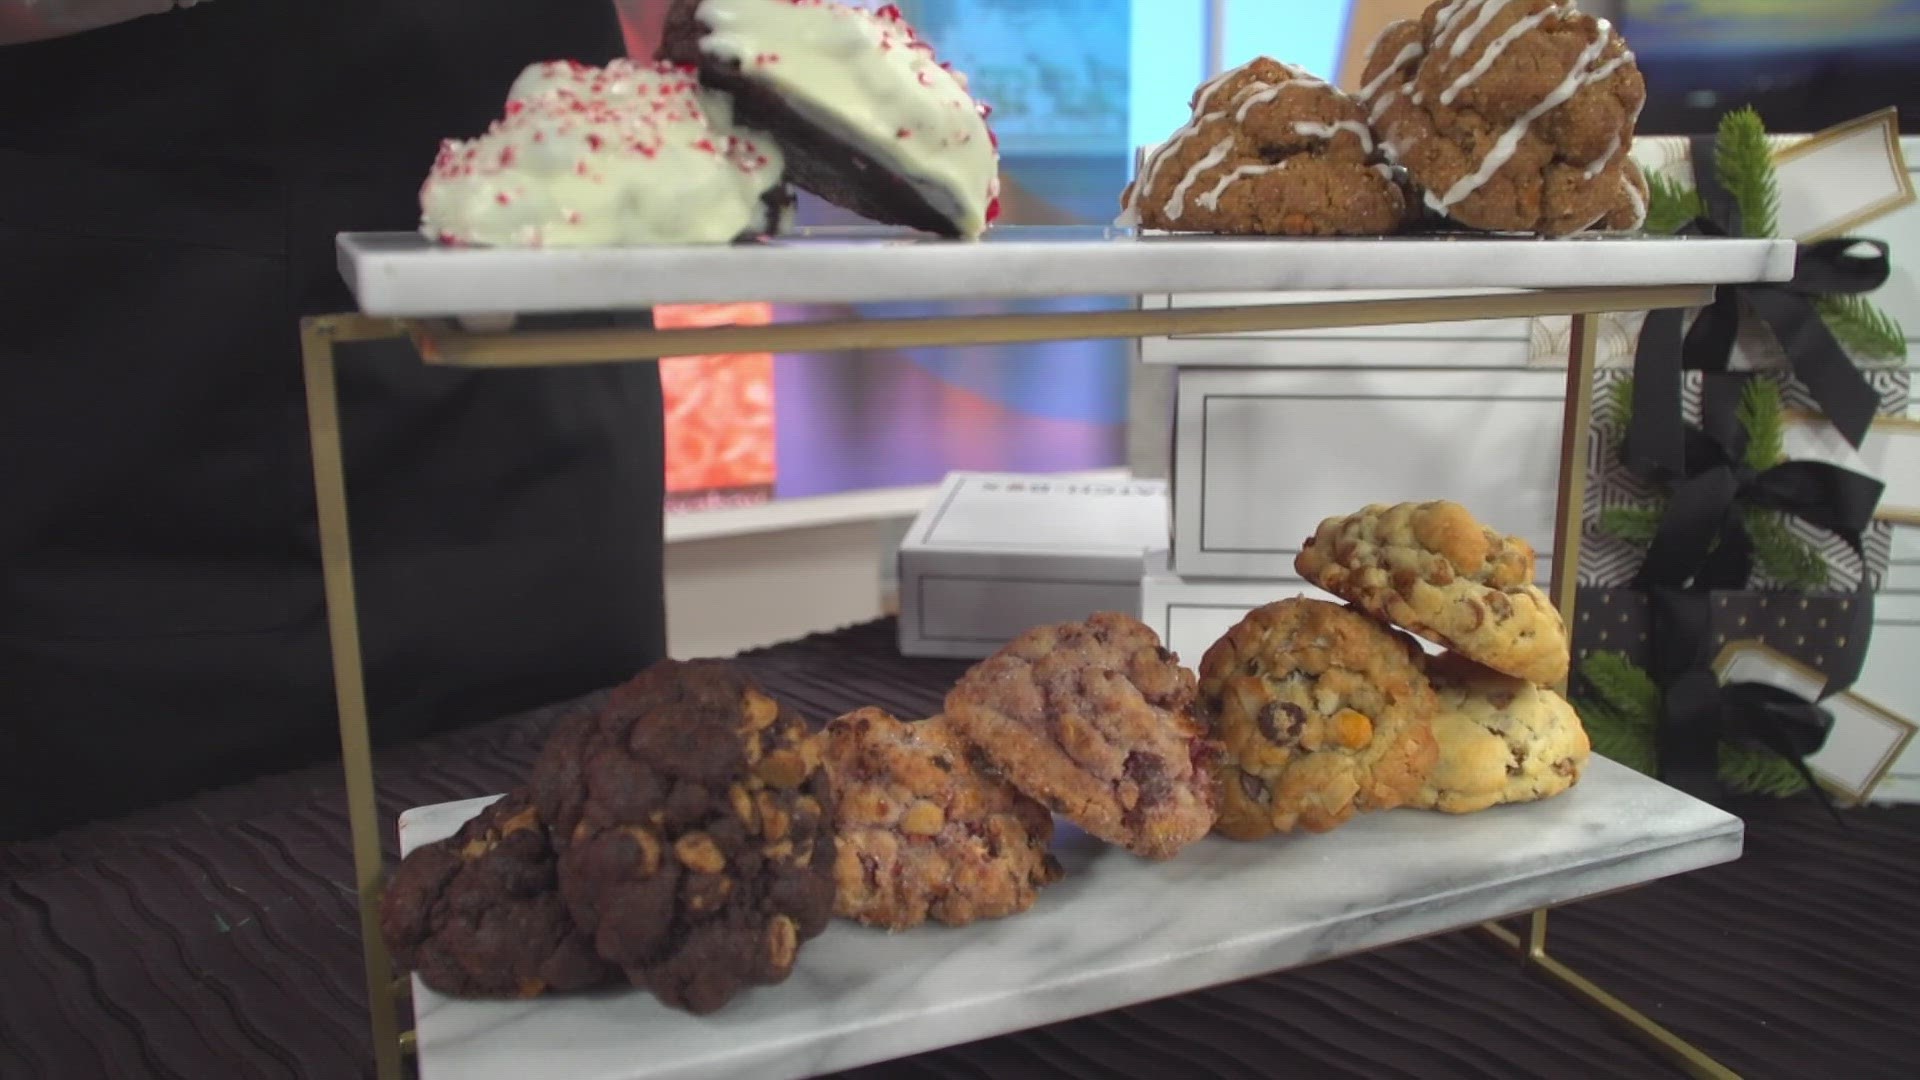 Today is National Cookie Day and we're highlighting a local gourmet cookie company that's worth trying.